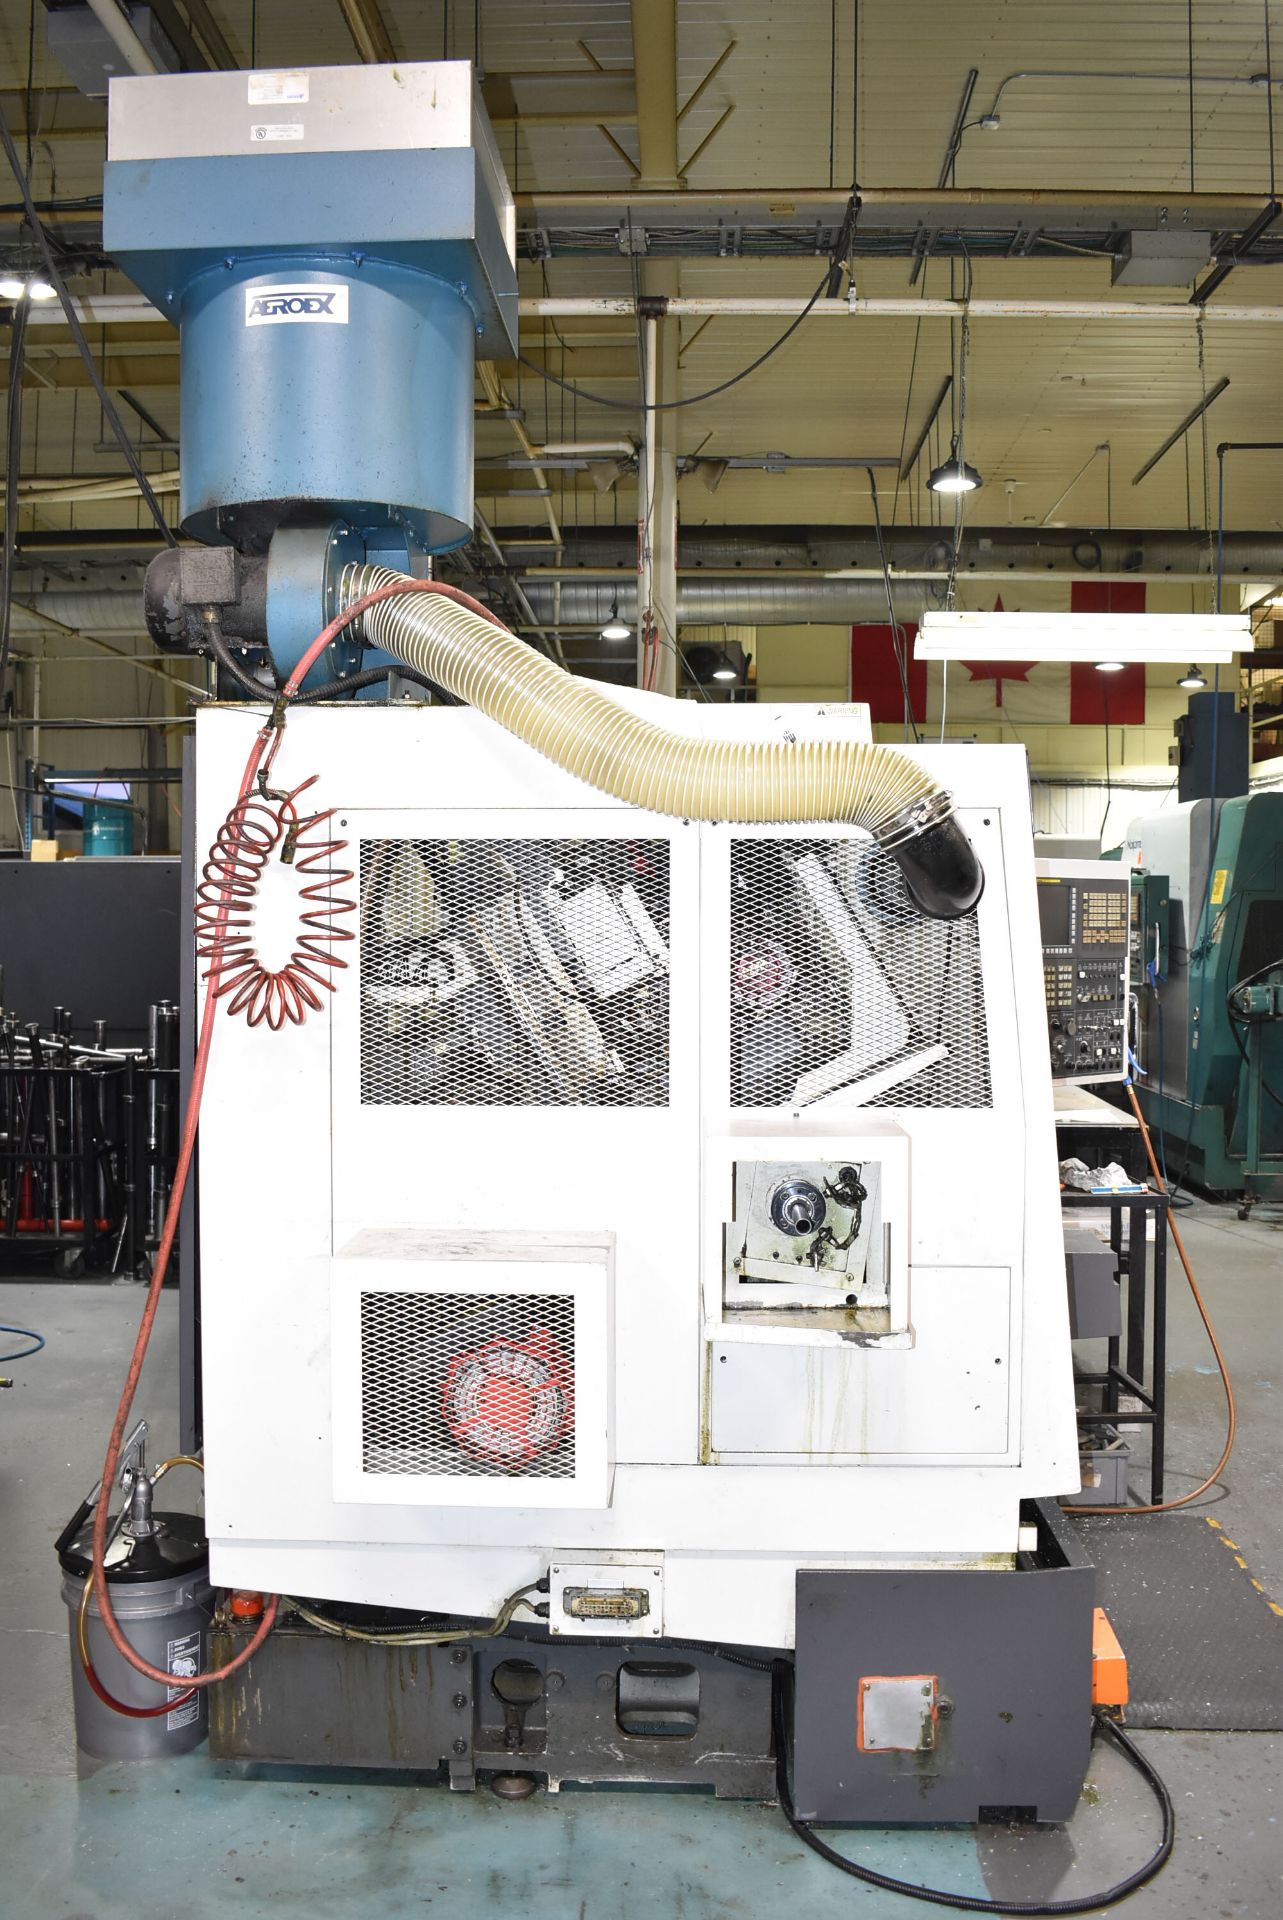 NAKAMURA-TOME (2005) WT-100 MMYS MULTI-AXIS OPPOSED SPINDLE AND TWIN TURRET CNC MULTI-TASKING CENTER - Image 10 of 17